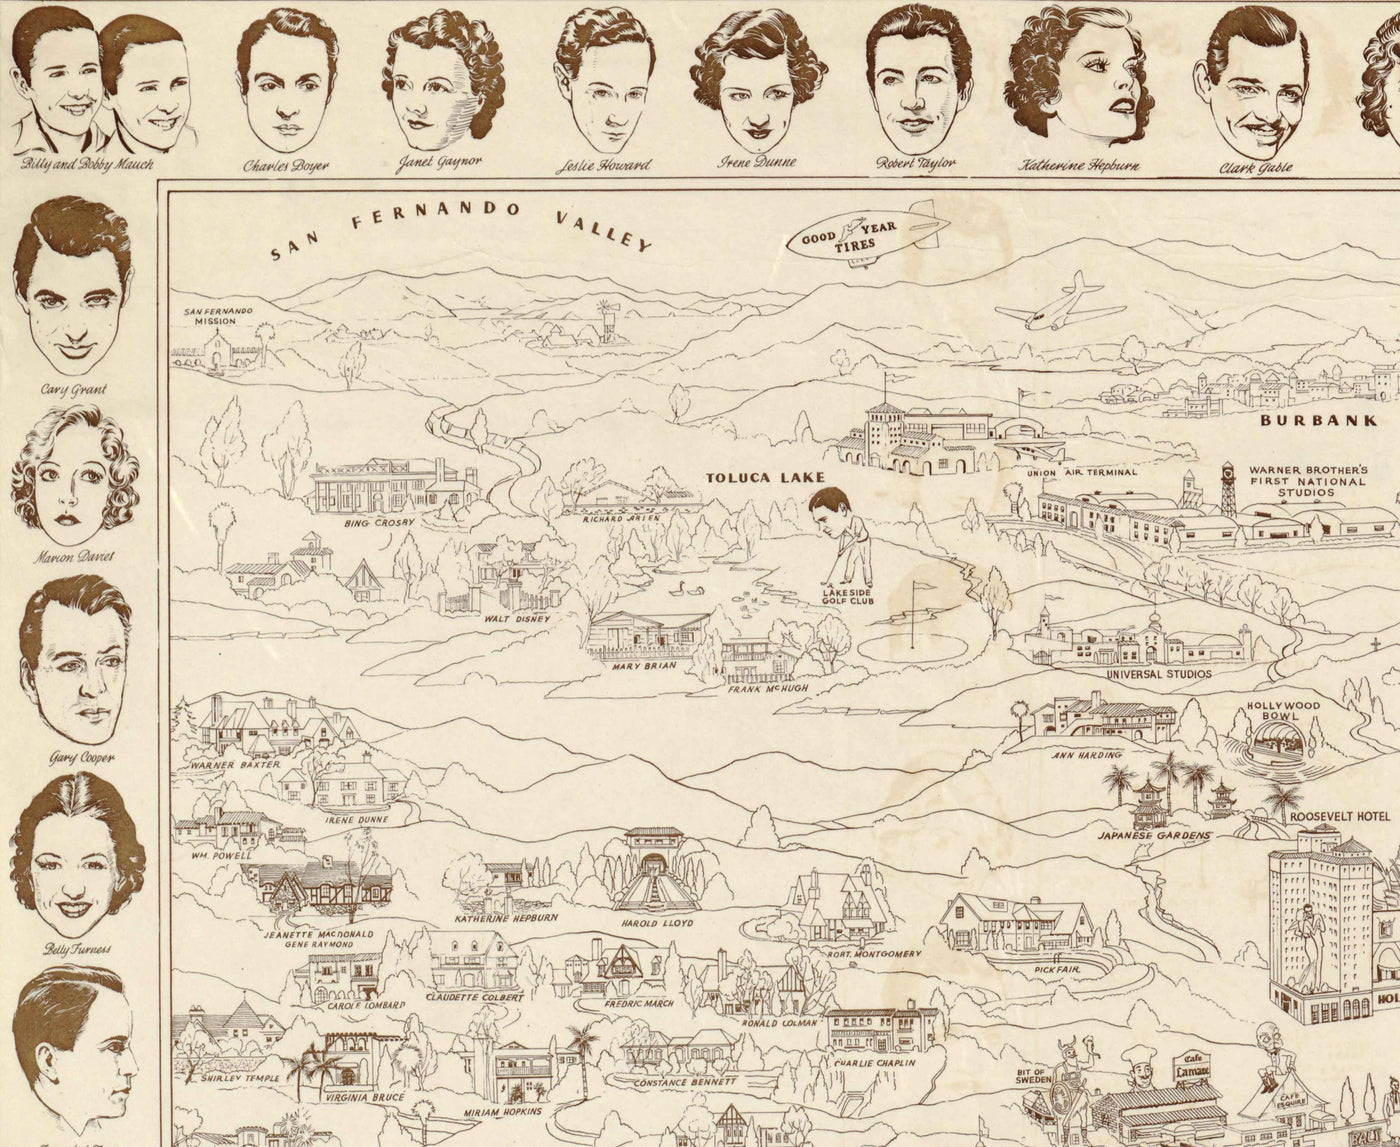 Old Pictorial Map of Hollywood Starland, 1937 by Don Boggs - Movie Stars, Film History, Beverly Hills, Santa Monica, Malibu